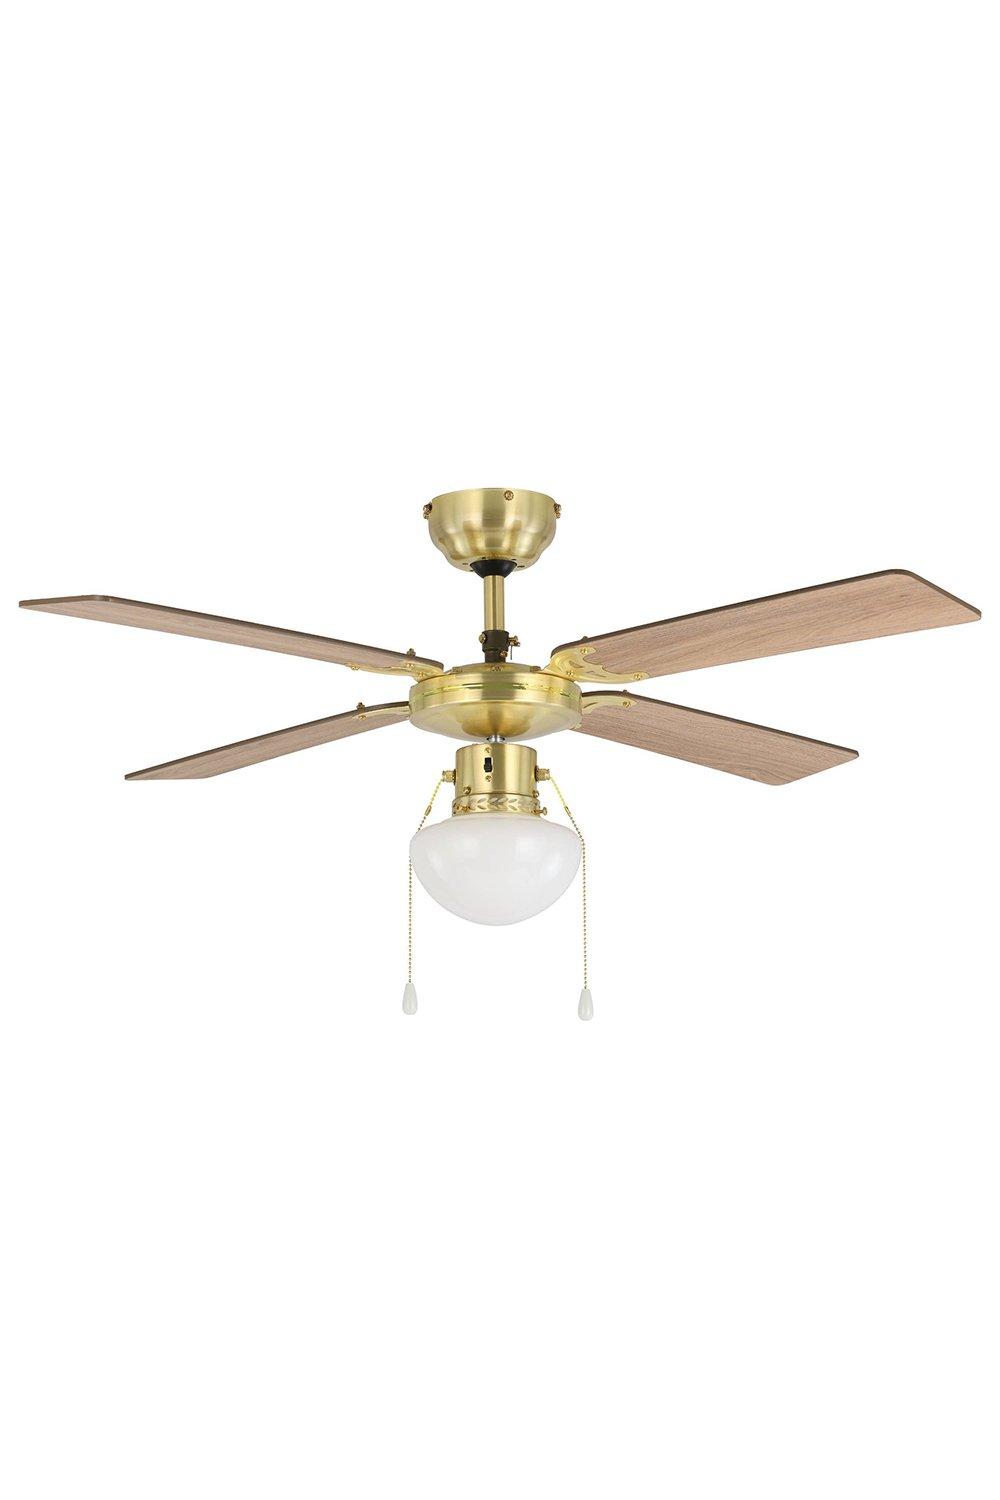 Photos - Floodlight / Street Light EGLO Fortaleza Bronze And Natural Wood Ceiling Fan With Light 